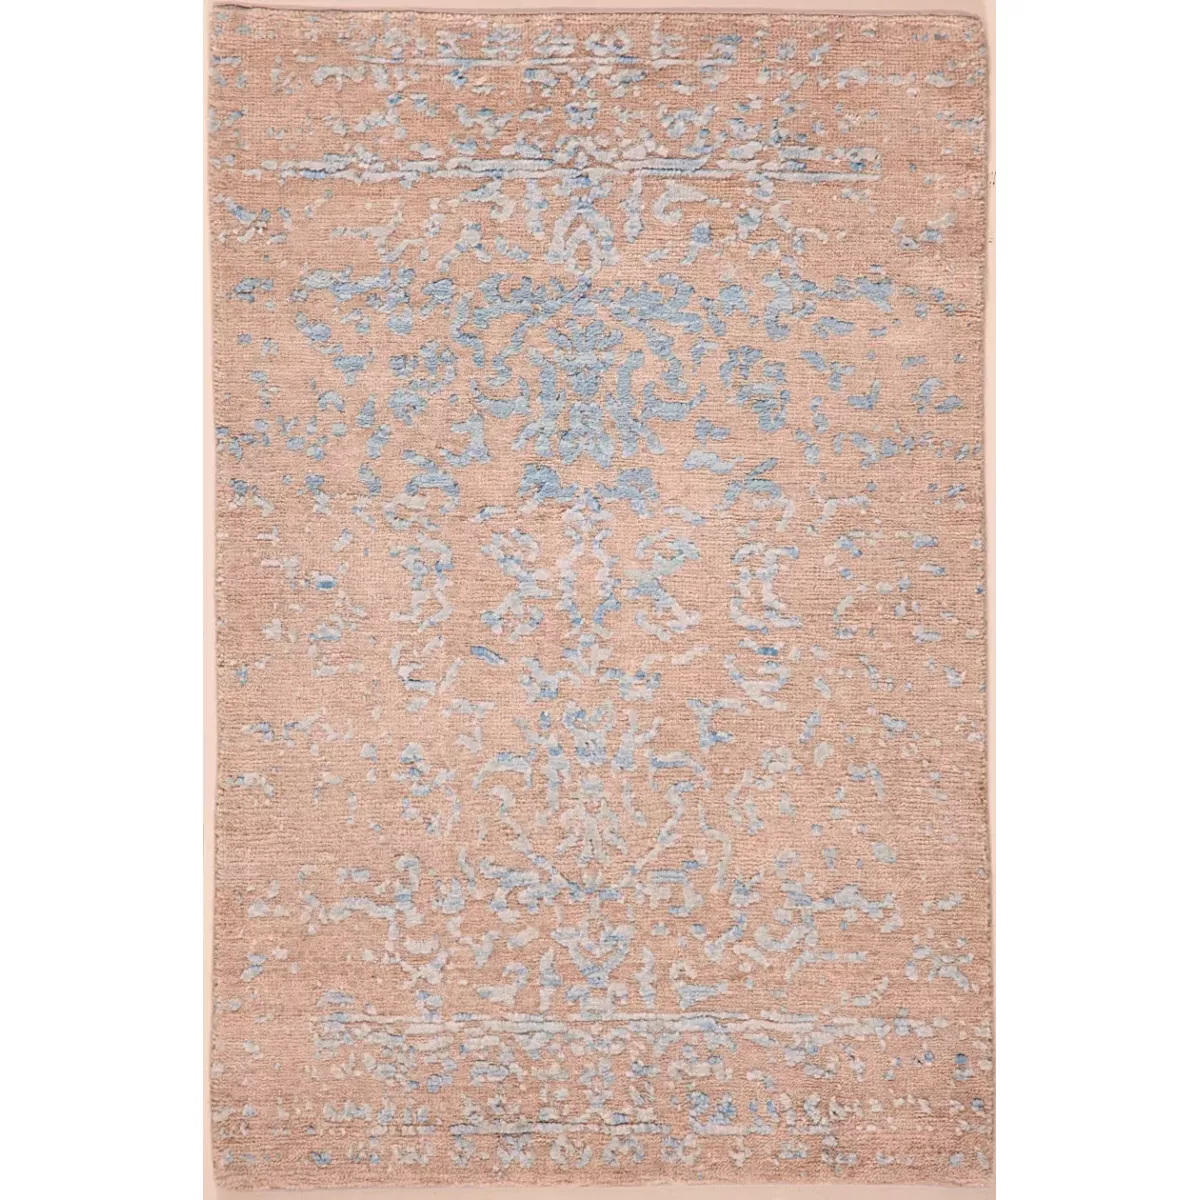 Baral Sand turquoise 92x60